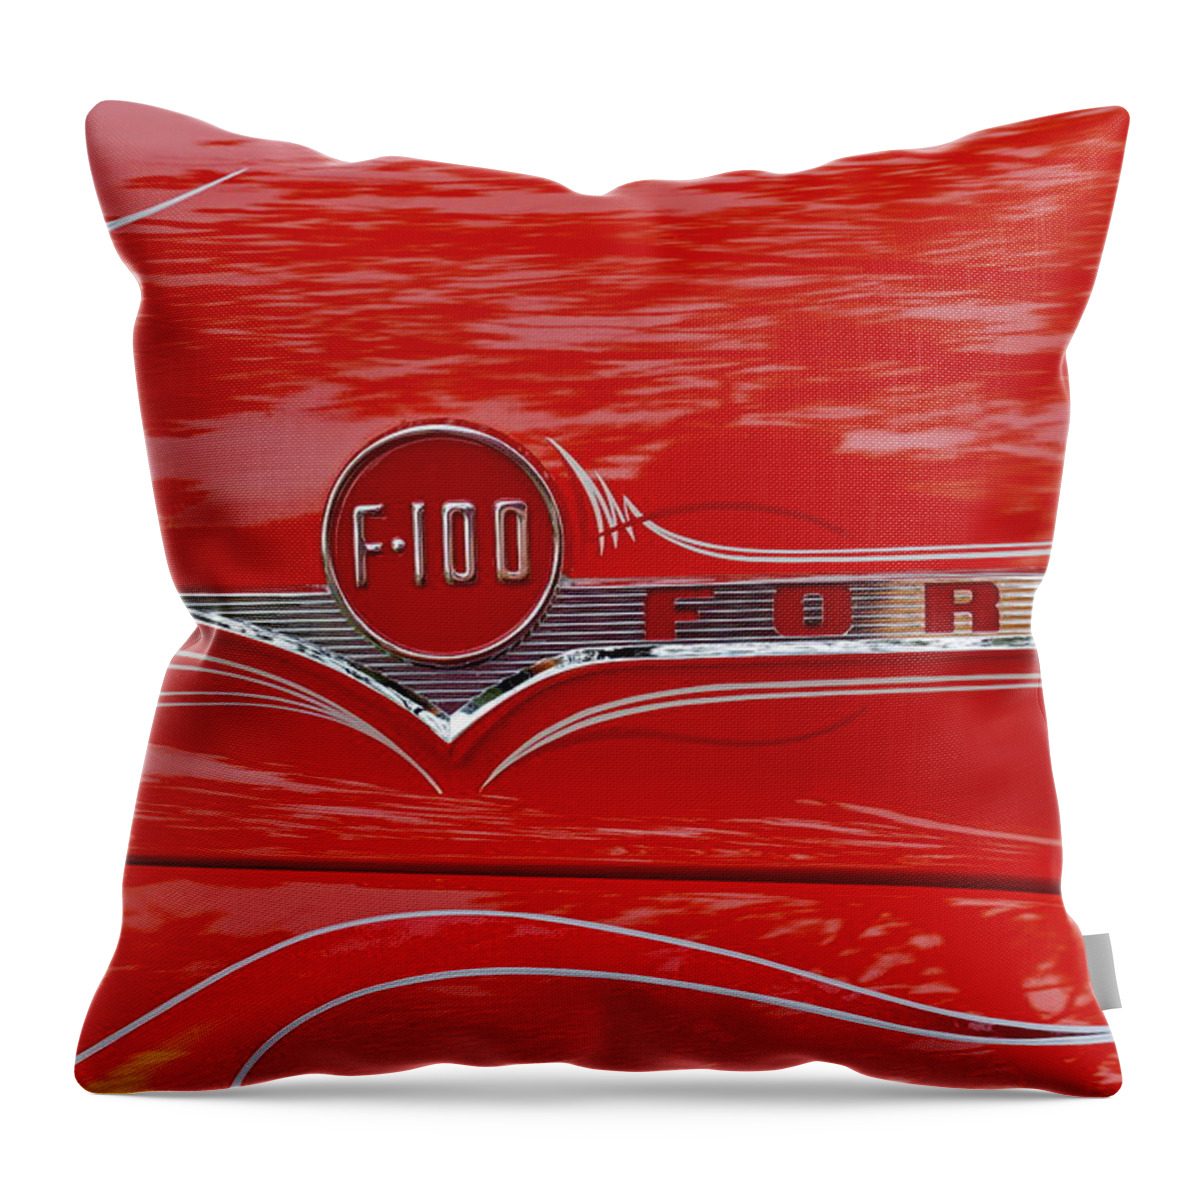 1956 Throw Pillow featuring the photograph 1956 Ford F100 Hood Emblem by Alan Hutchins